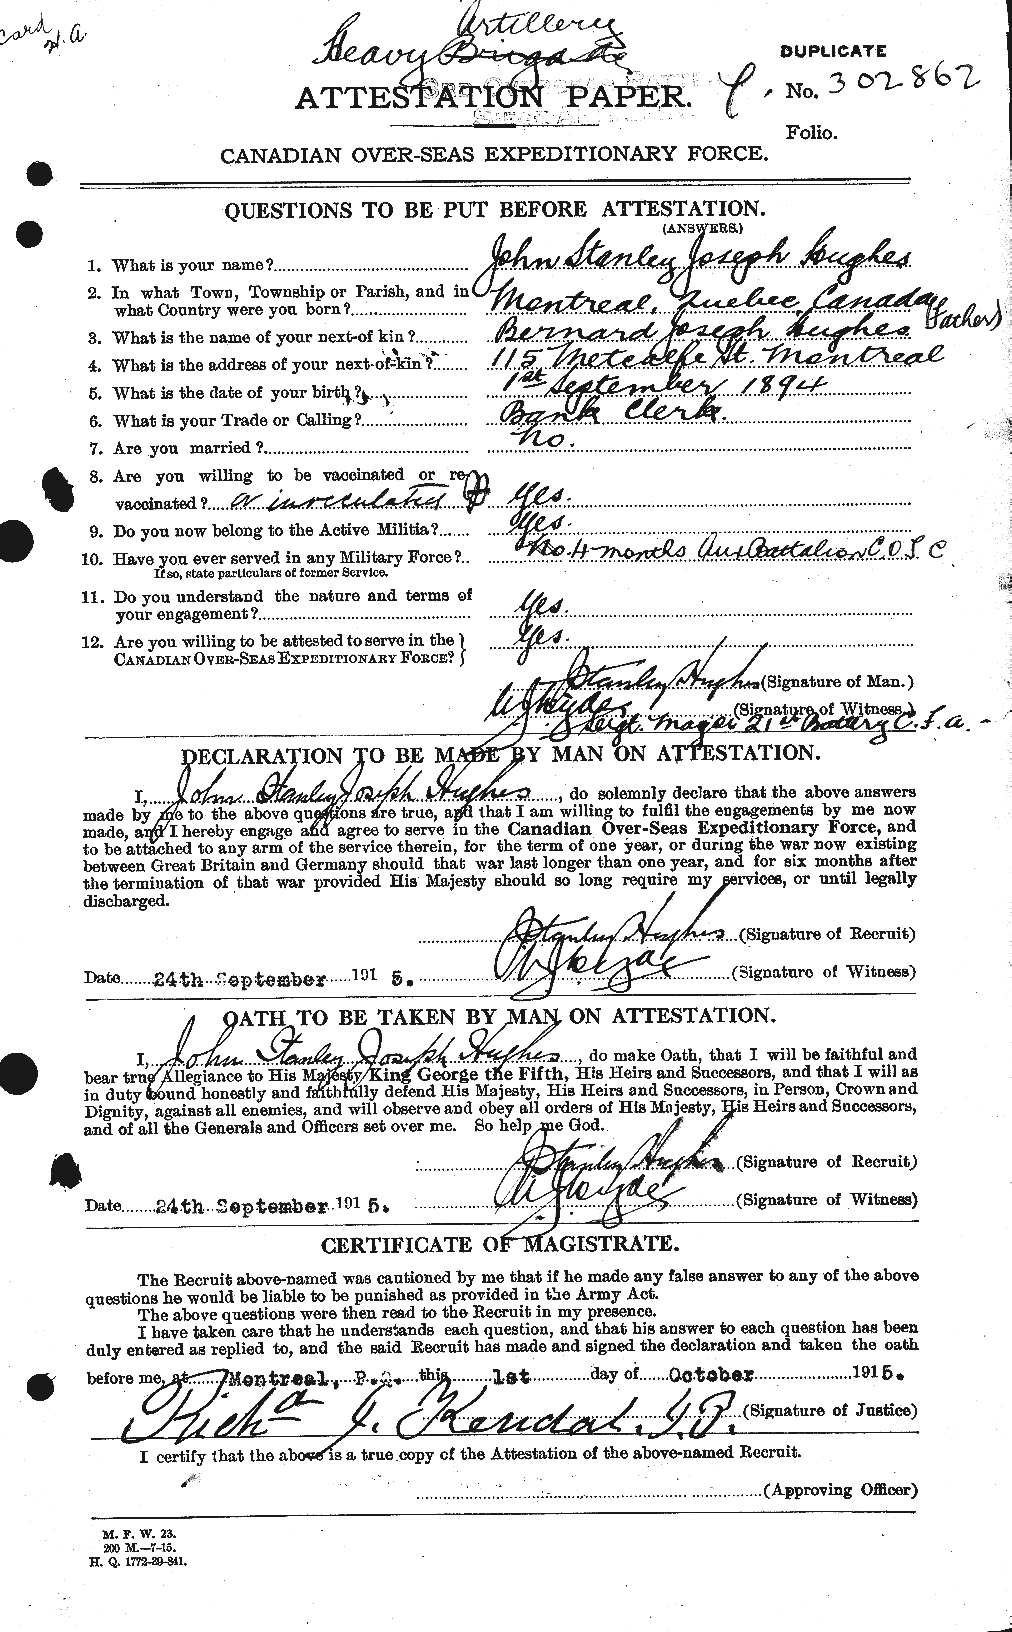 Personnel Records of the First World War - CEF 404050a